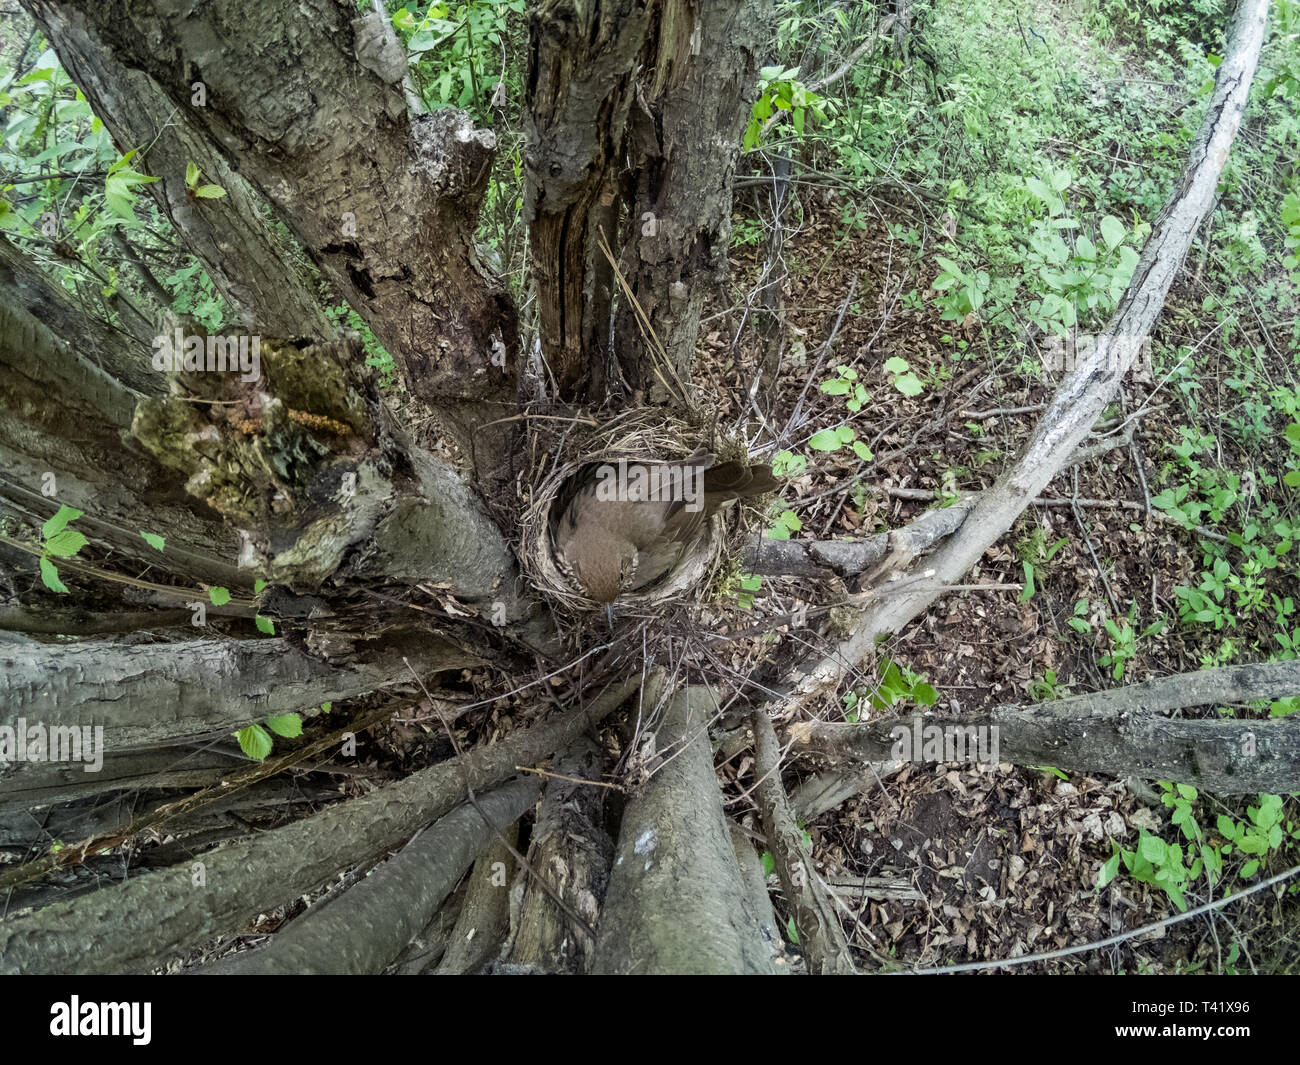 Turdus philomelos. The nest of the Song Thrush in nature. Stock Photo